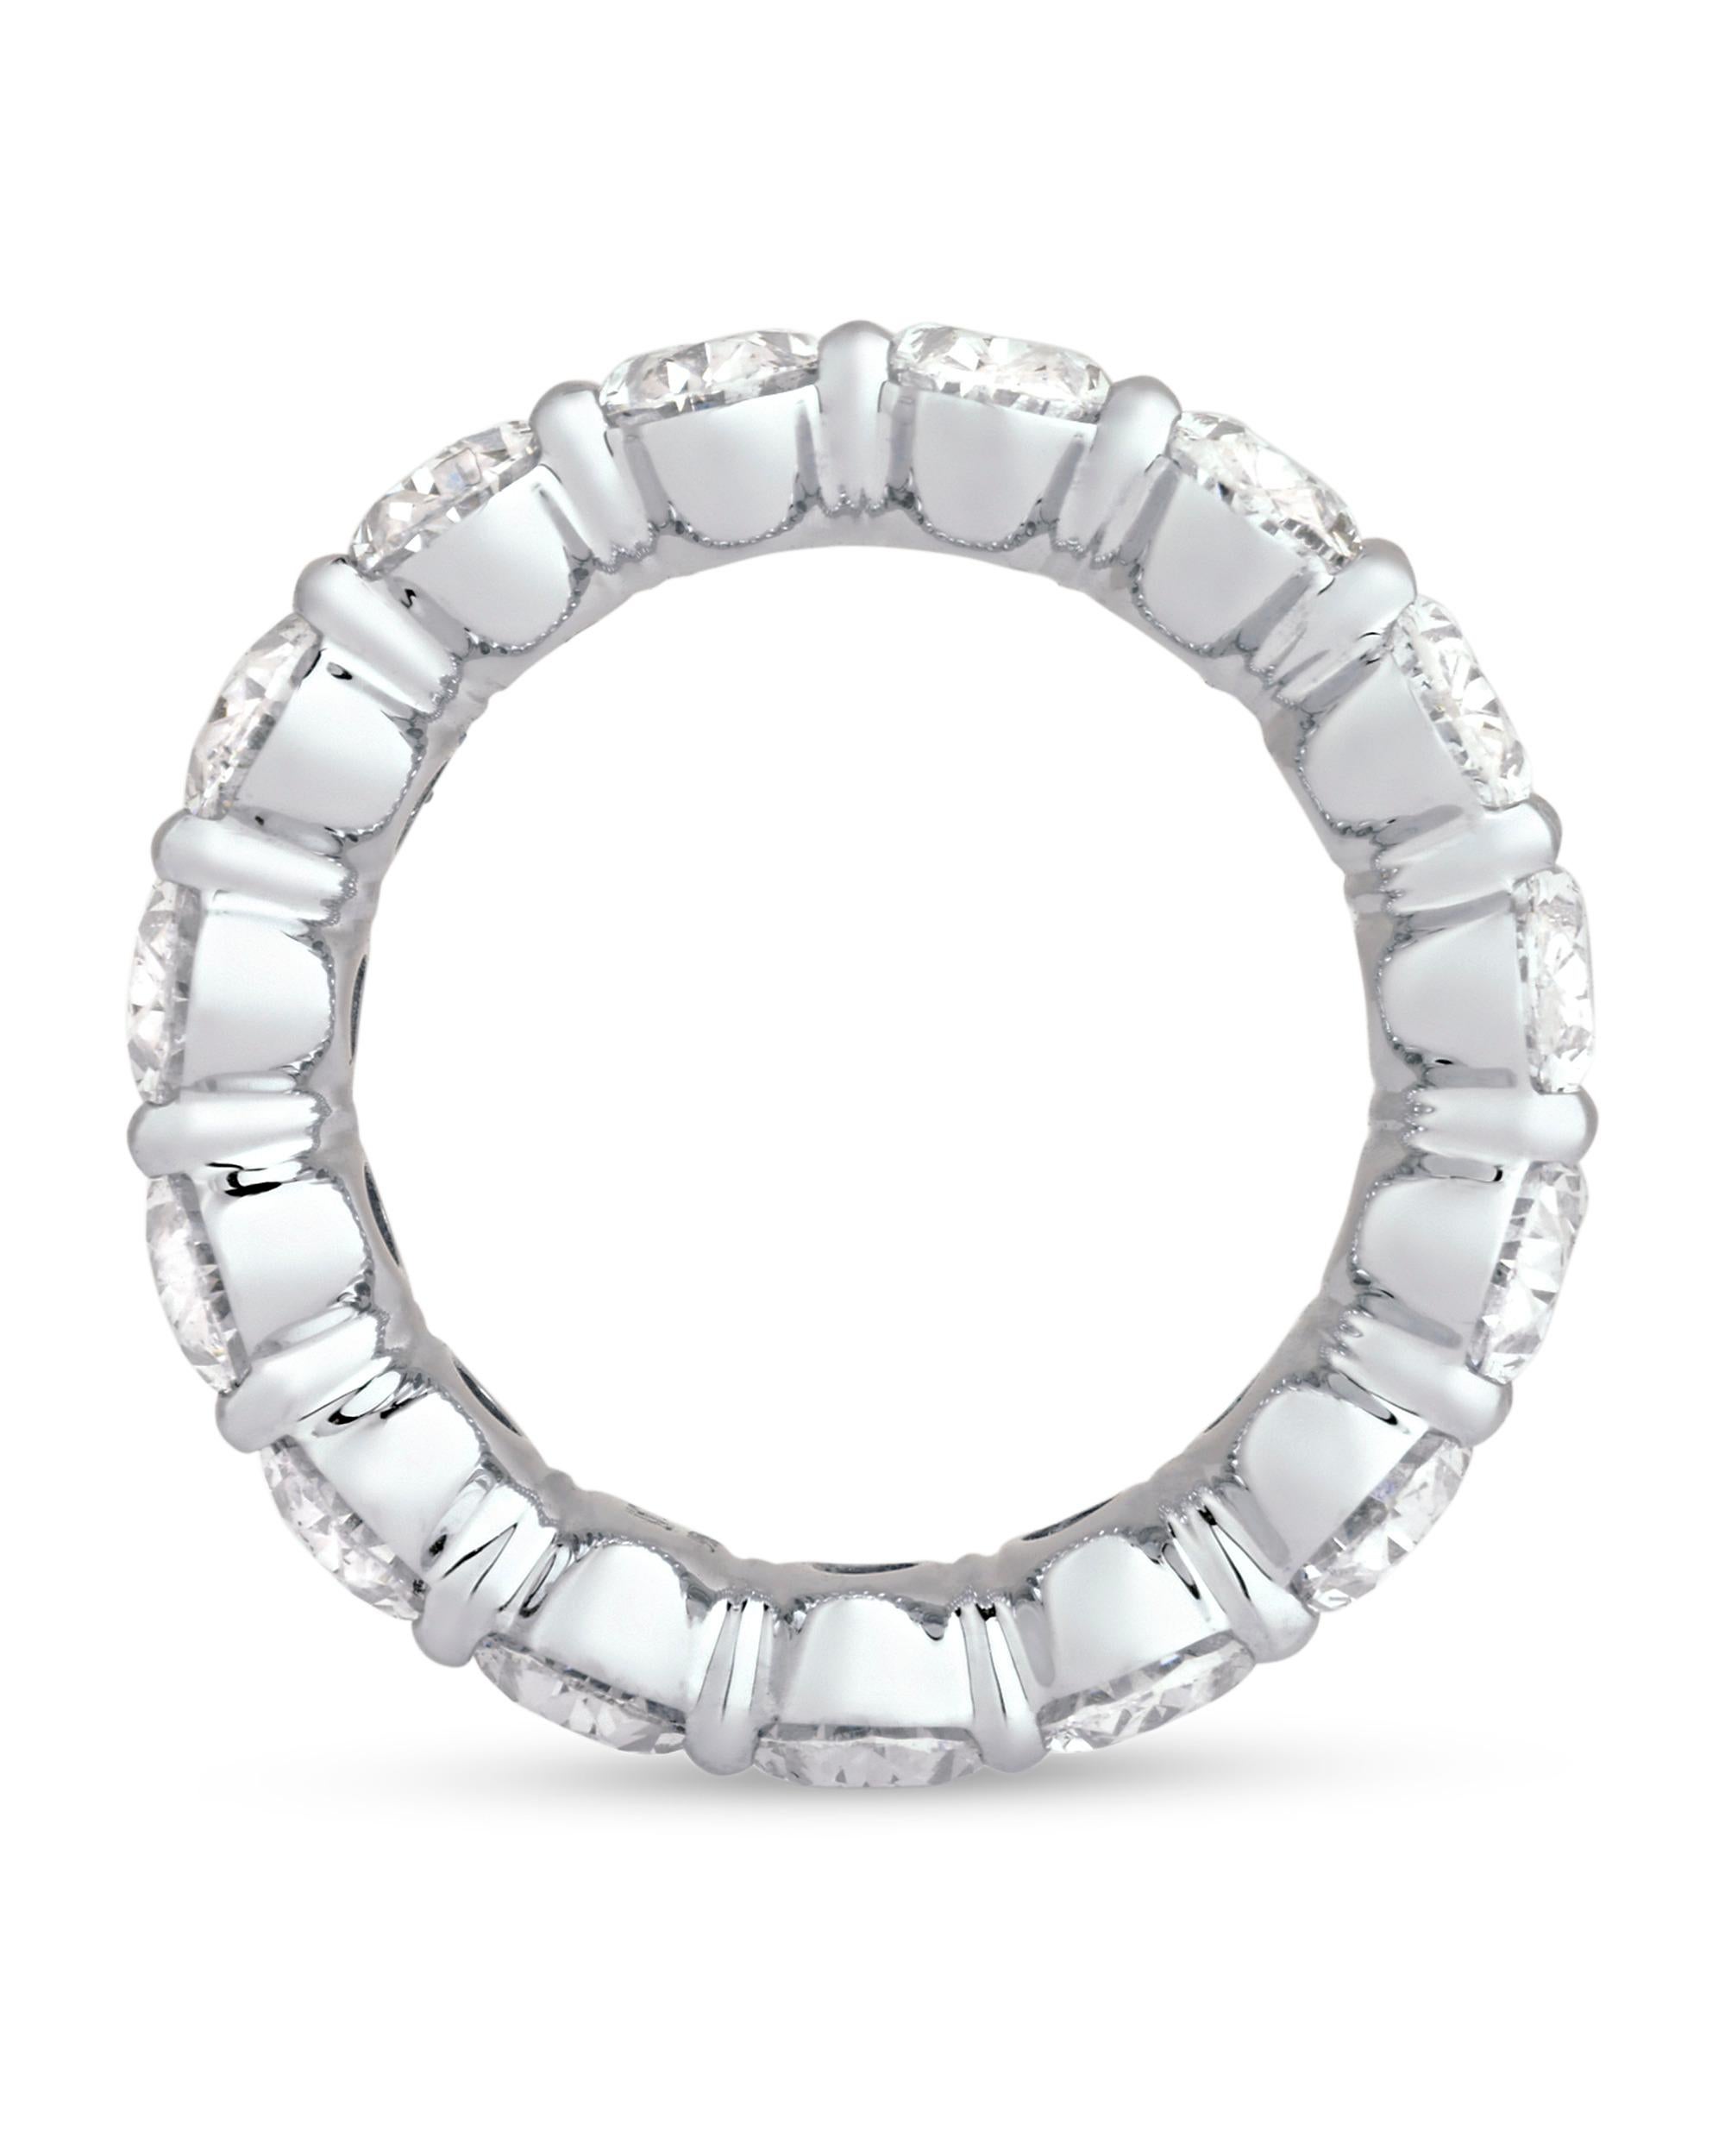 Classic and refined, this exquisite diamond eternity band is comprised of superb oval diamonds totaling 7.58 carats. Set in platinum, the diamonds shine in this timeless design.